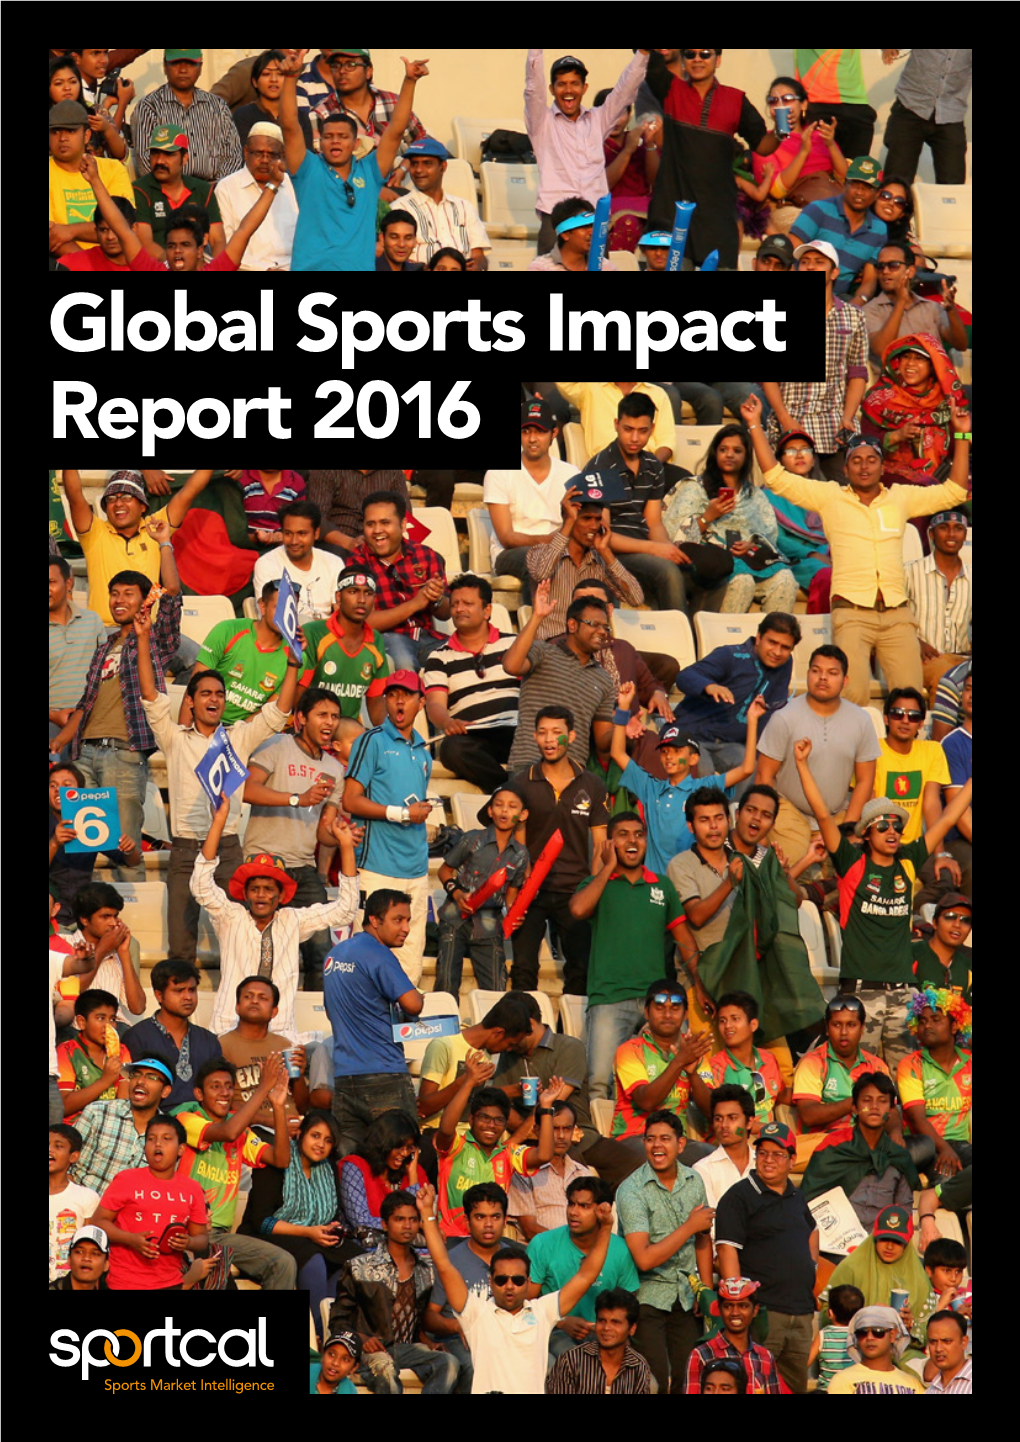 Global Sports Impact Report 2016 Contents / Global Sports Impact Report 2016 Global Sports Impact Report 2016 / Contents